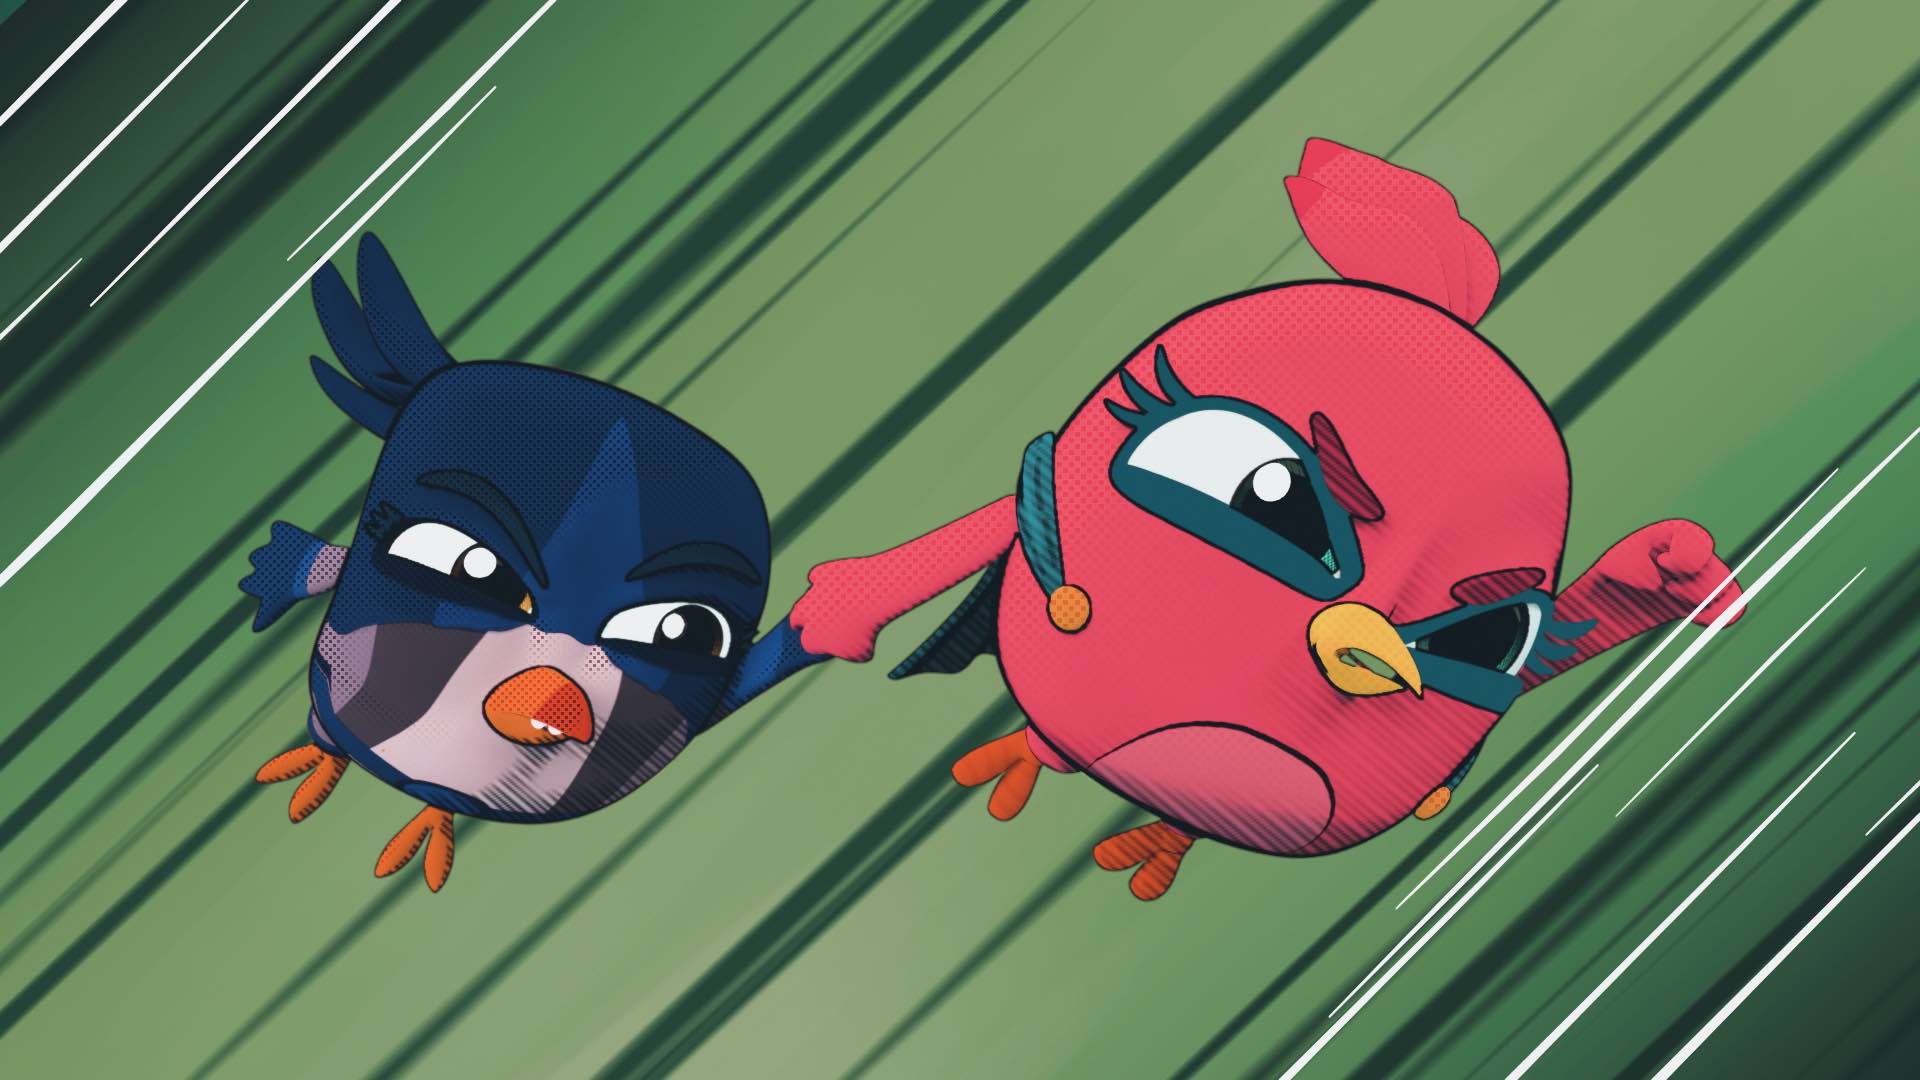 "Angry Birds Bubble Trouble"